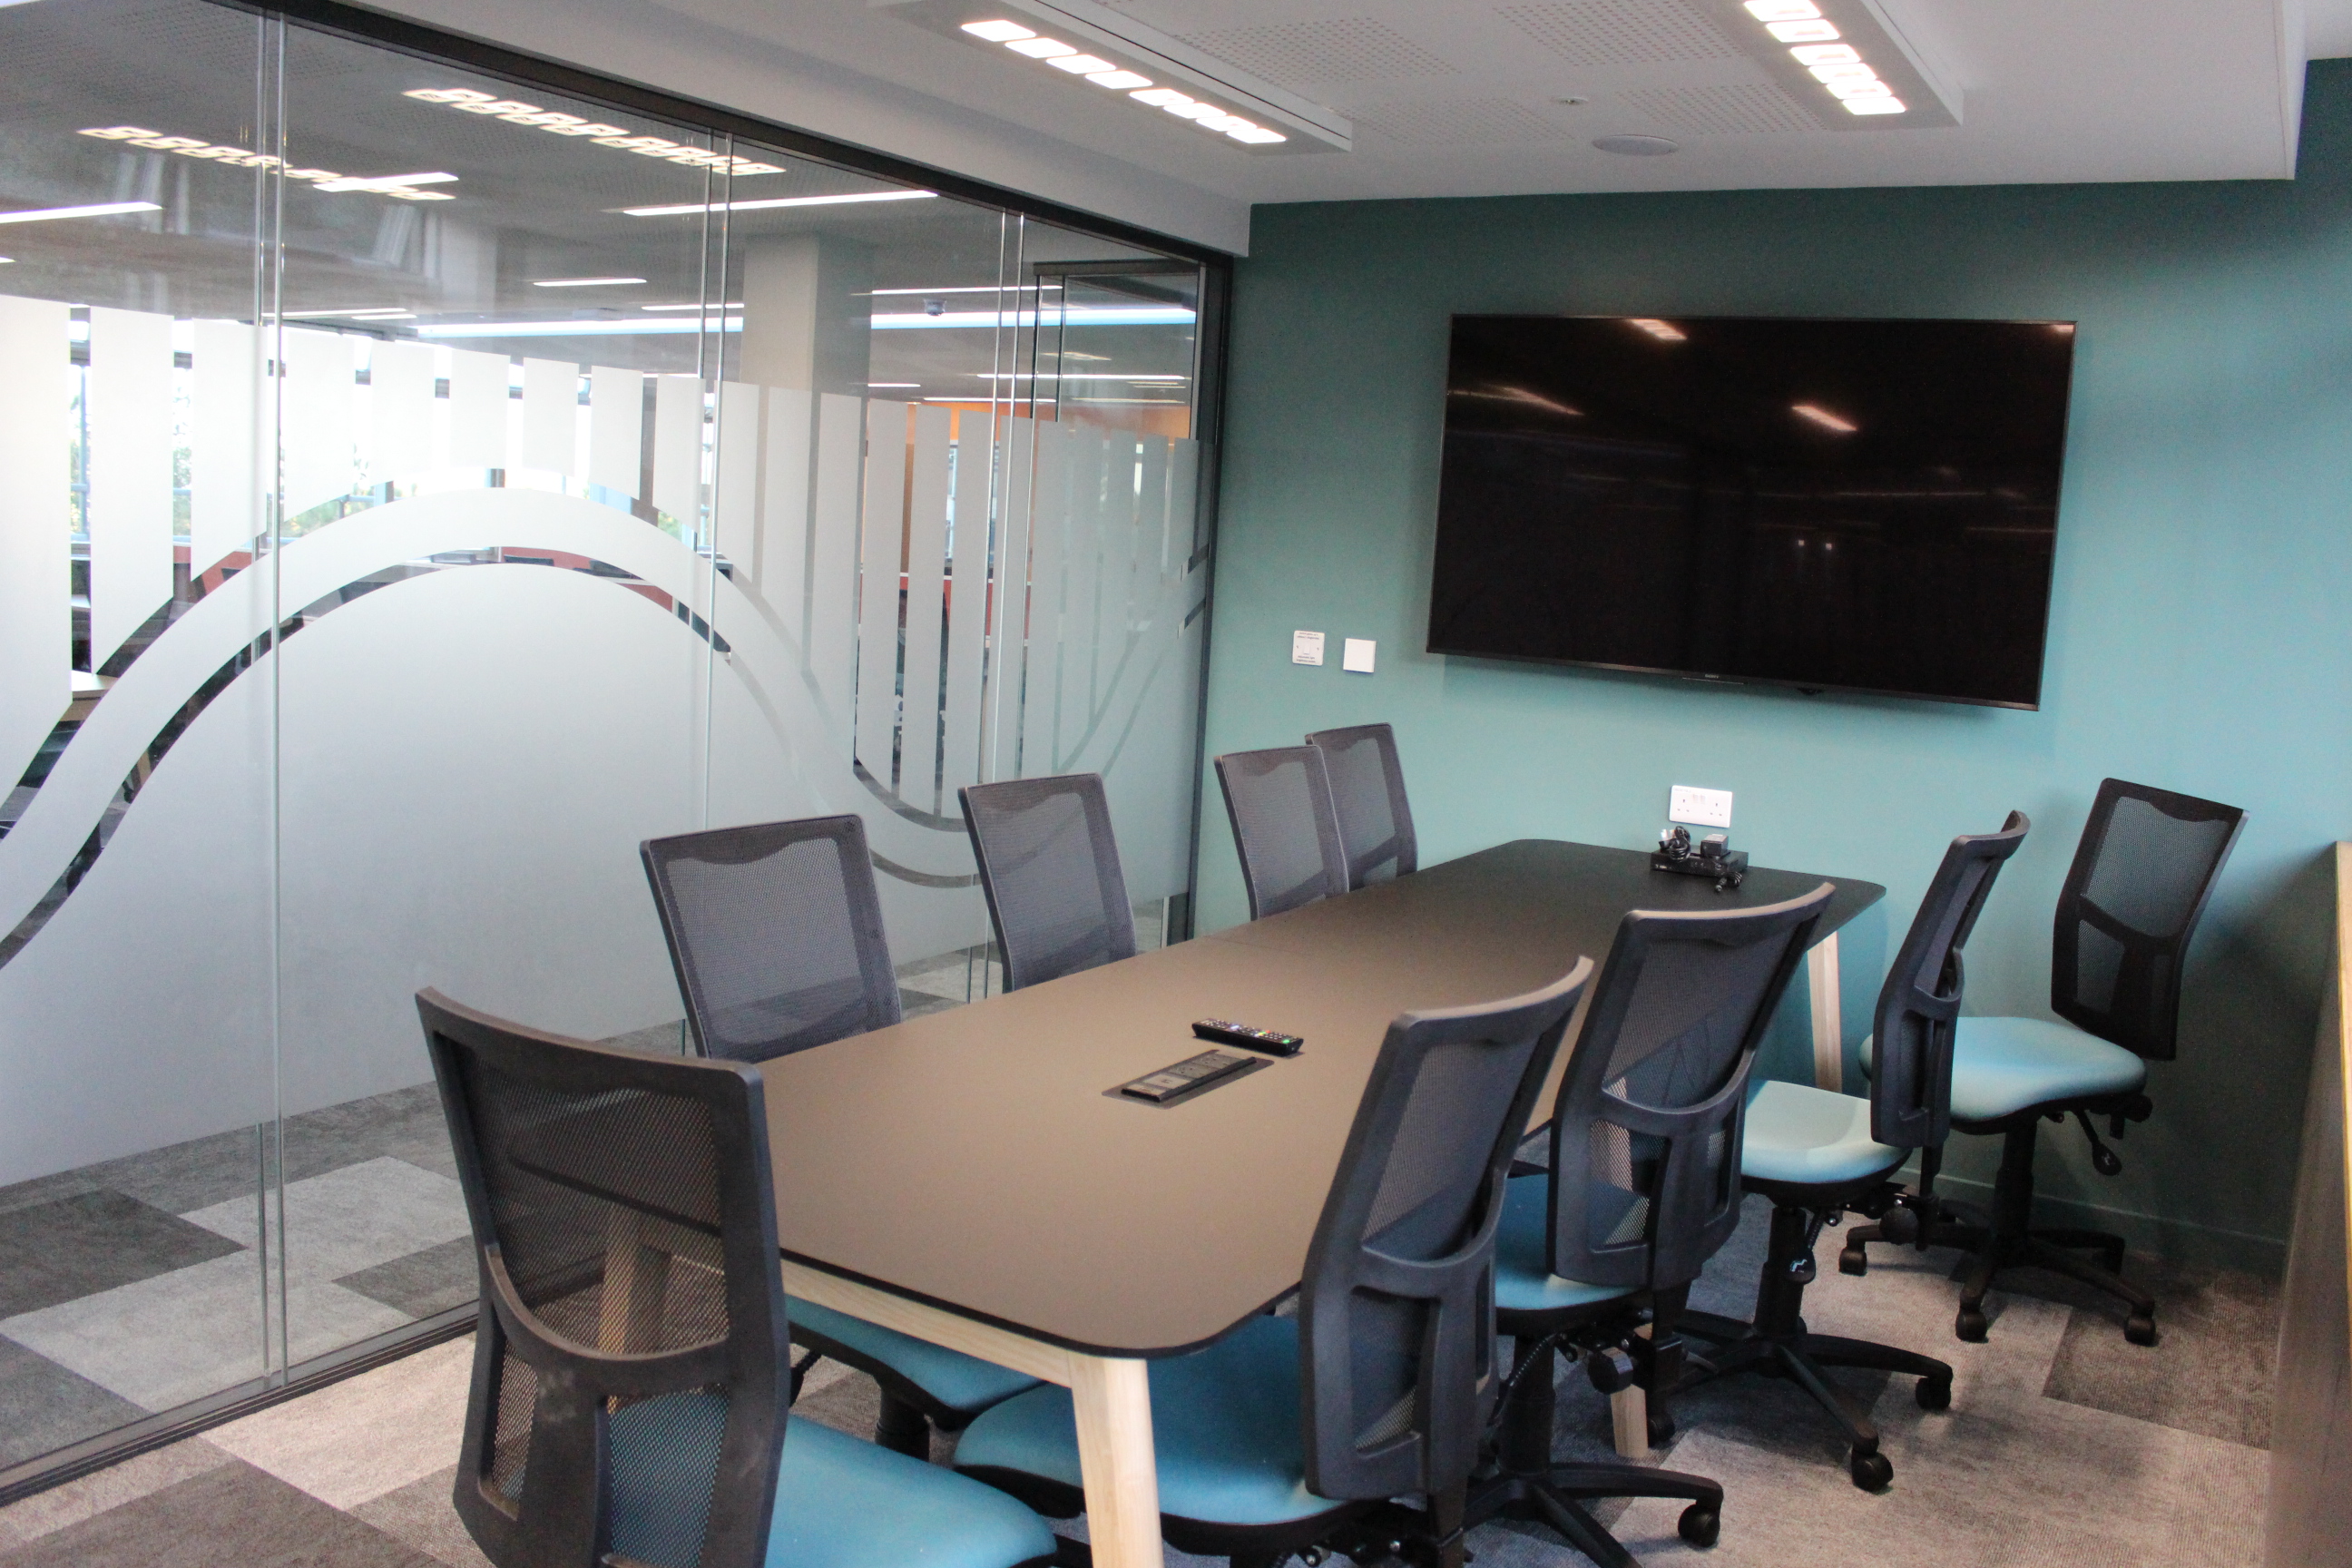 One of the new Group Study rooms